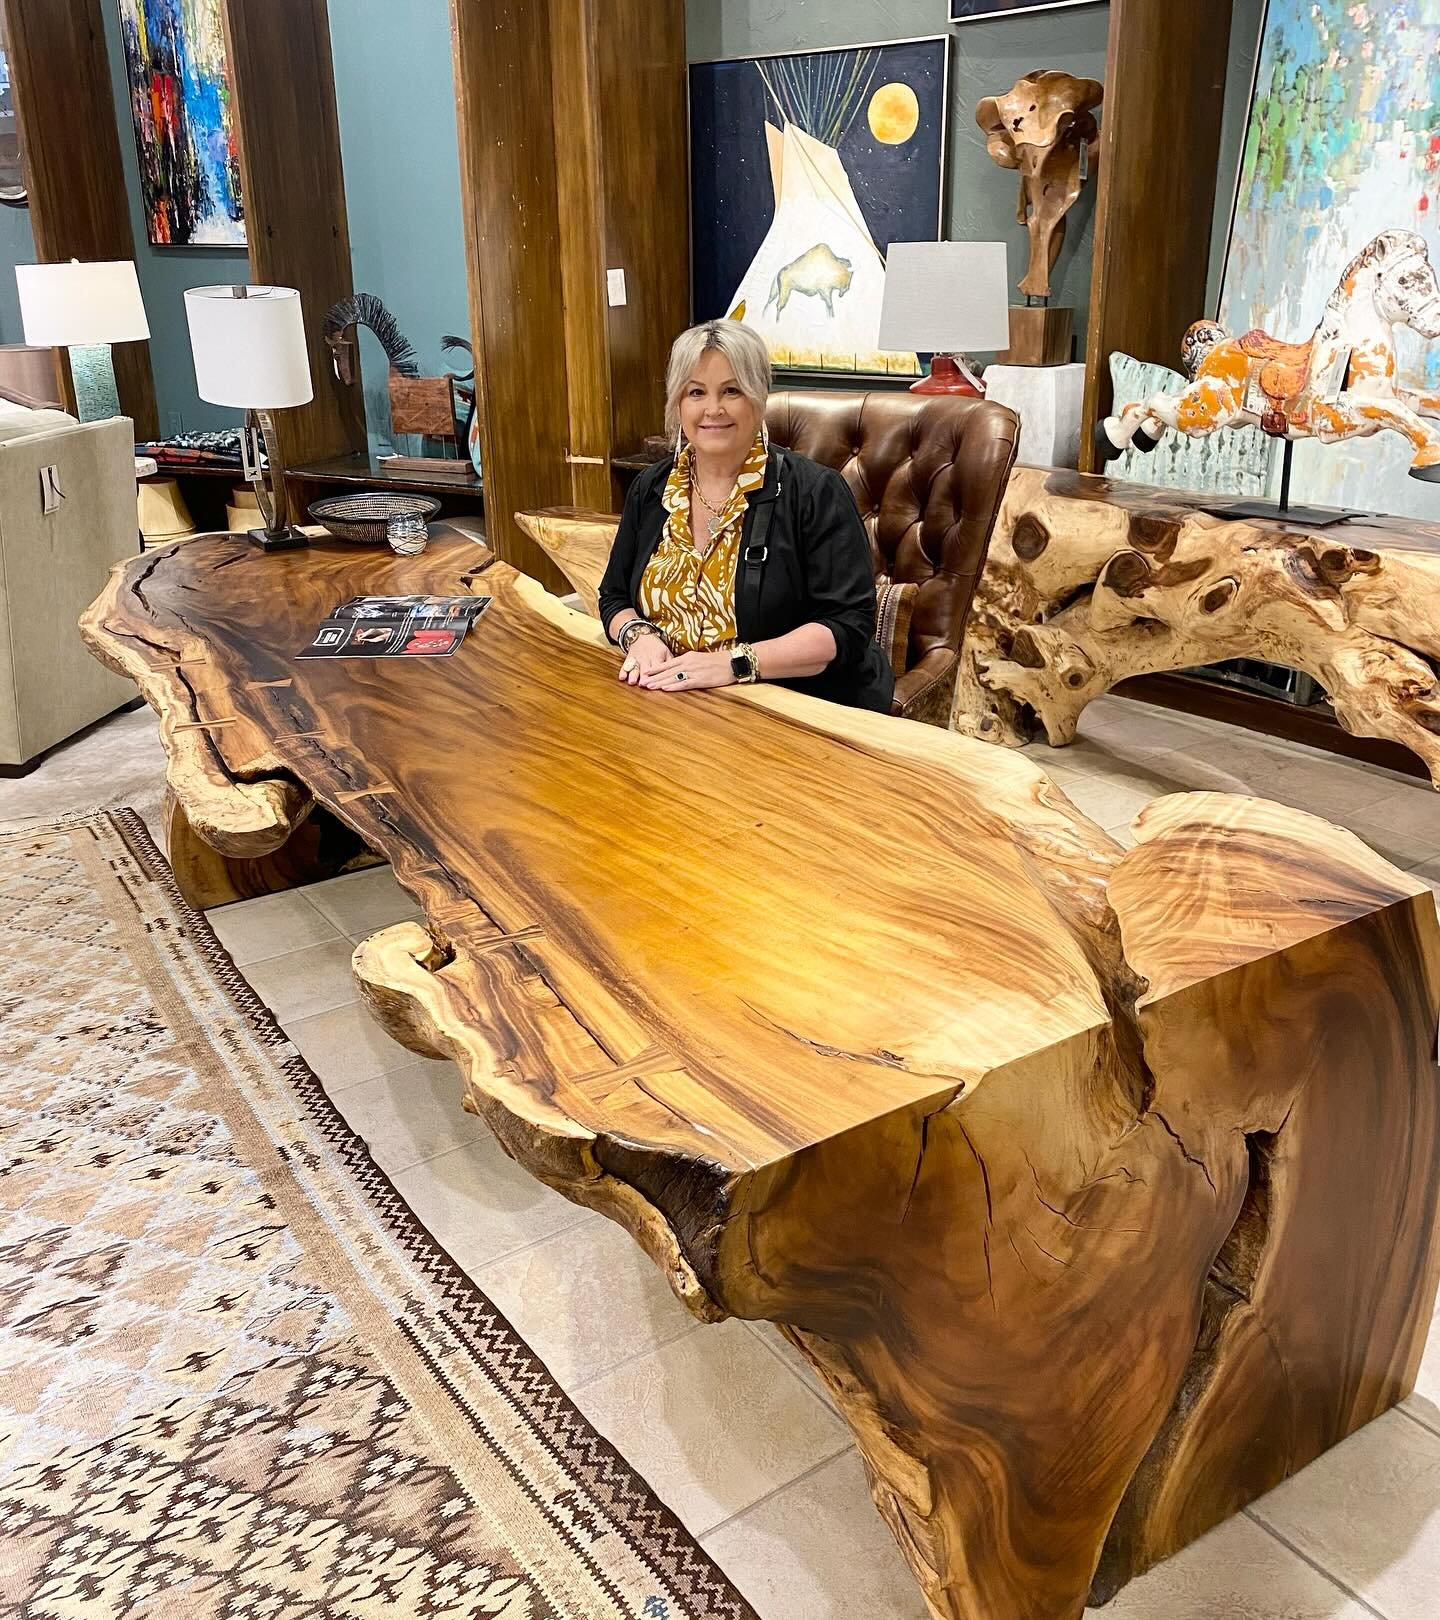 Happy Monday! Wouldn&rsquo;t you just love a desk like this? Oh the beautiful fabric samples I could lay out on this enormous desktop! @thearrangementinteriors #officespaces #ruthiestaalseninteriors #interiordesign #wooddesks #officedesign #officedes